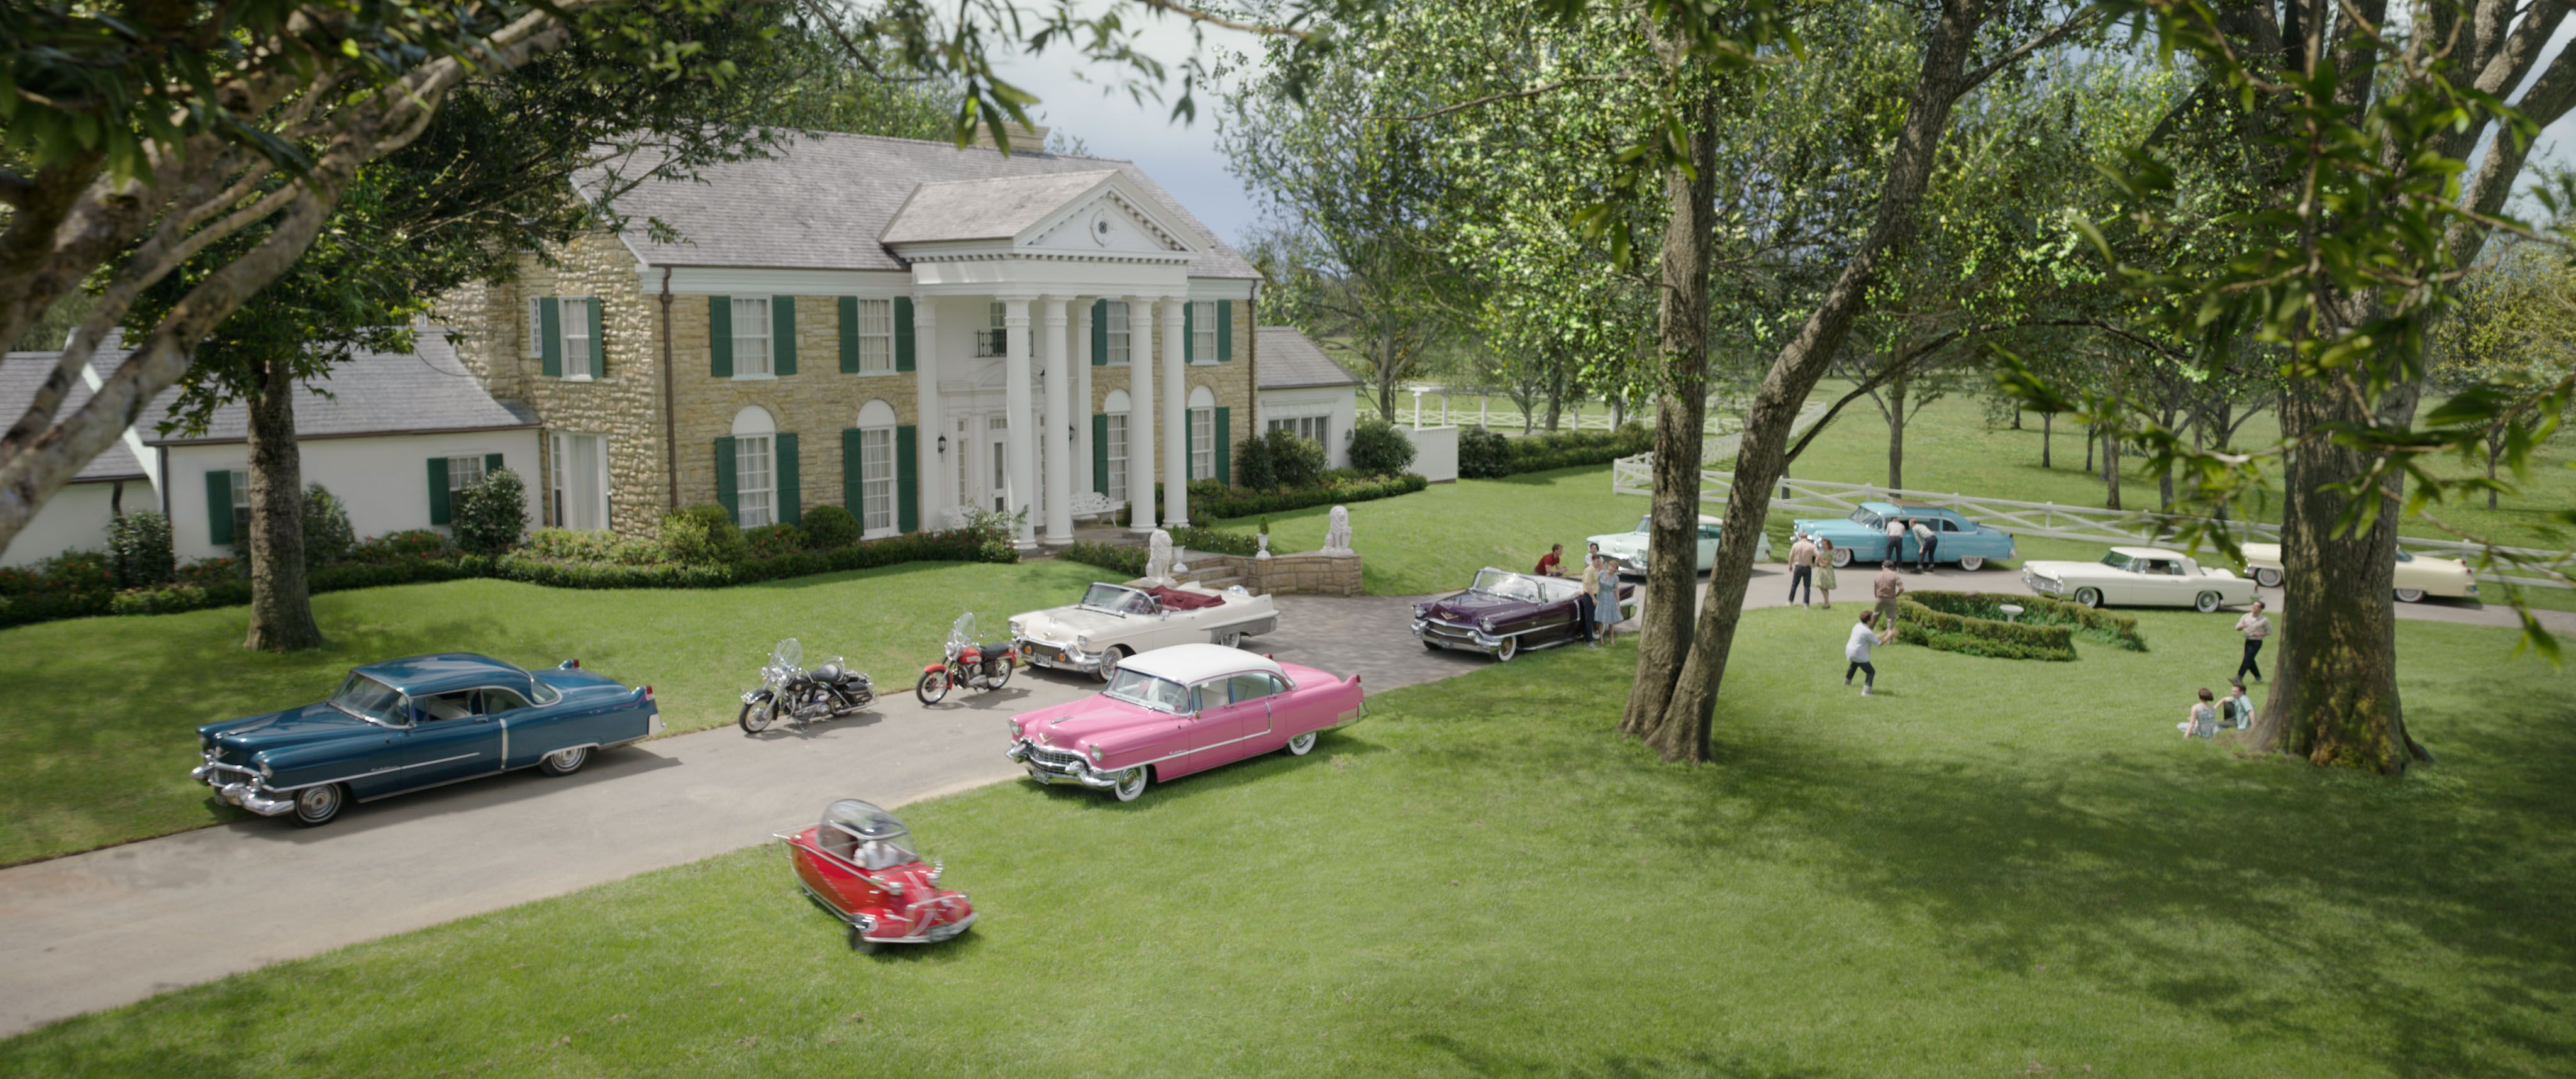 Graceland Was Recreated With Meticulous Detail for the New "Elvis" Movie